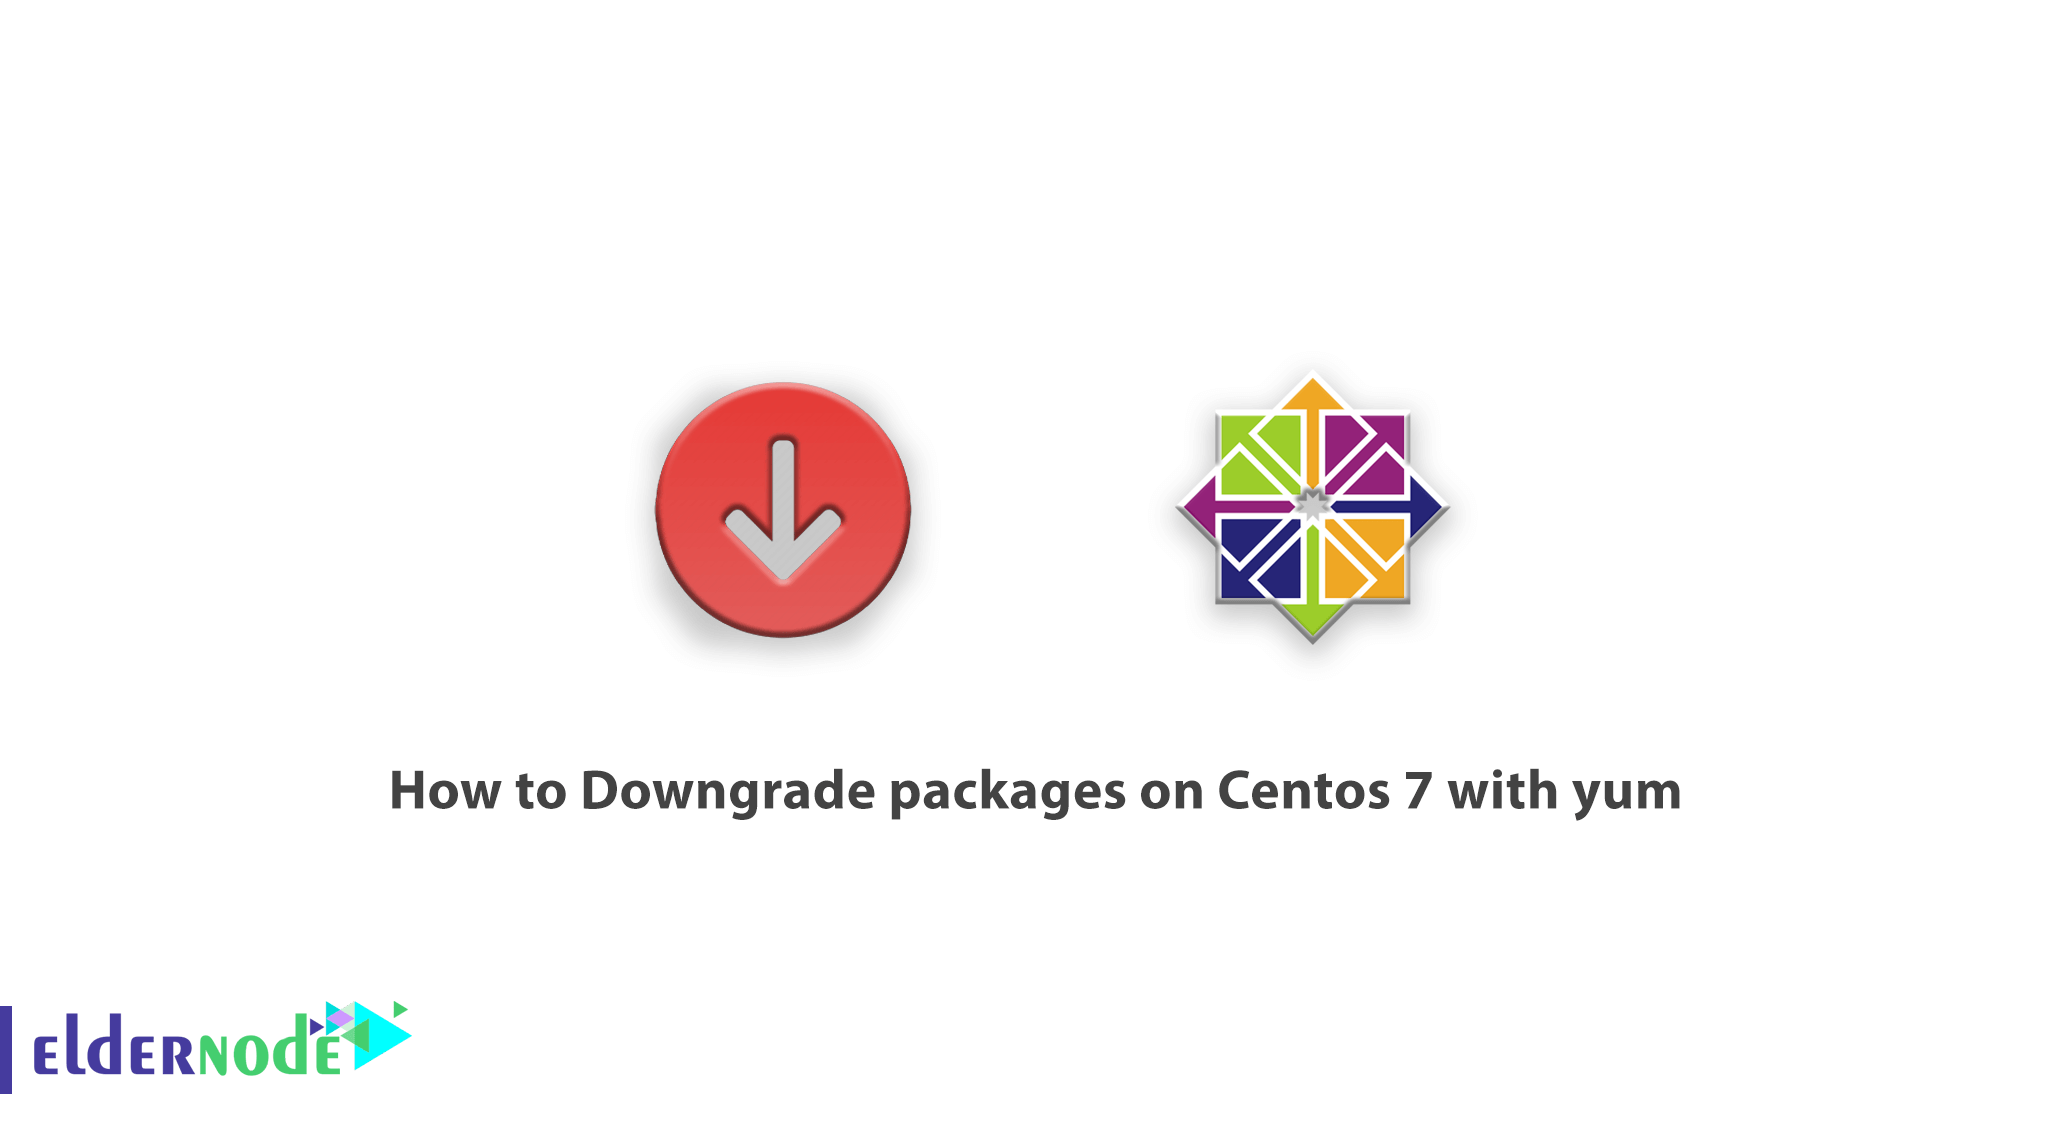 How to Downgrade packages on Centos 7 with yum